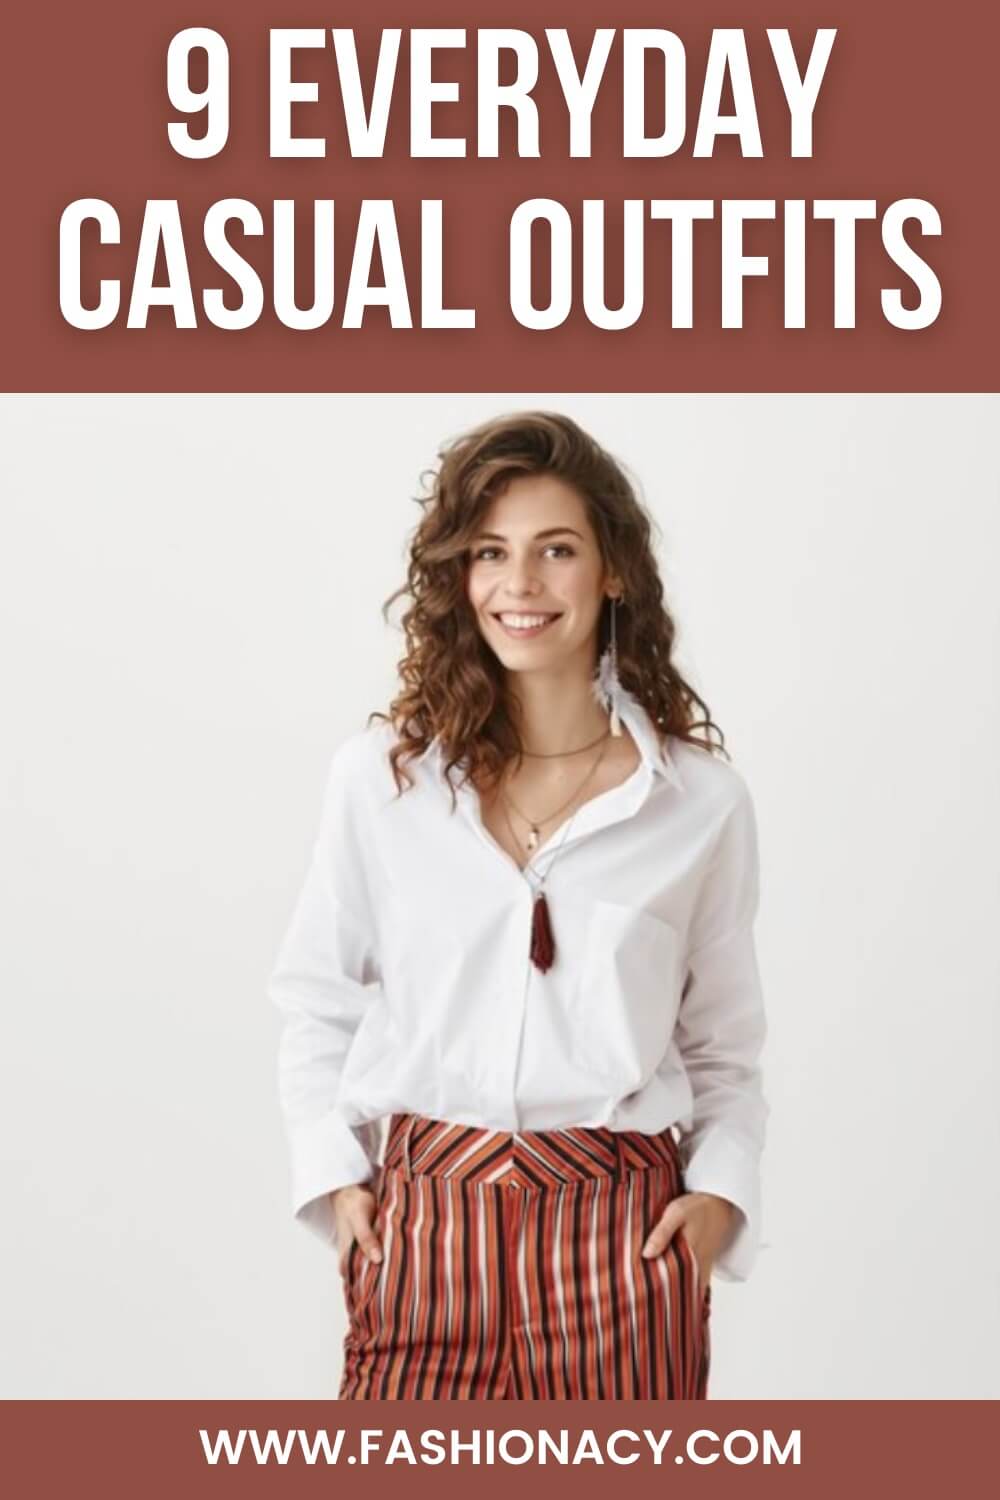 9 Everyday Casual Outfits For Spring and Summer